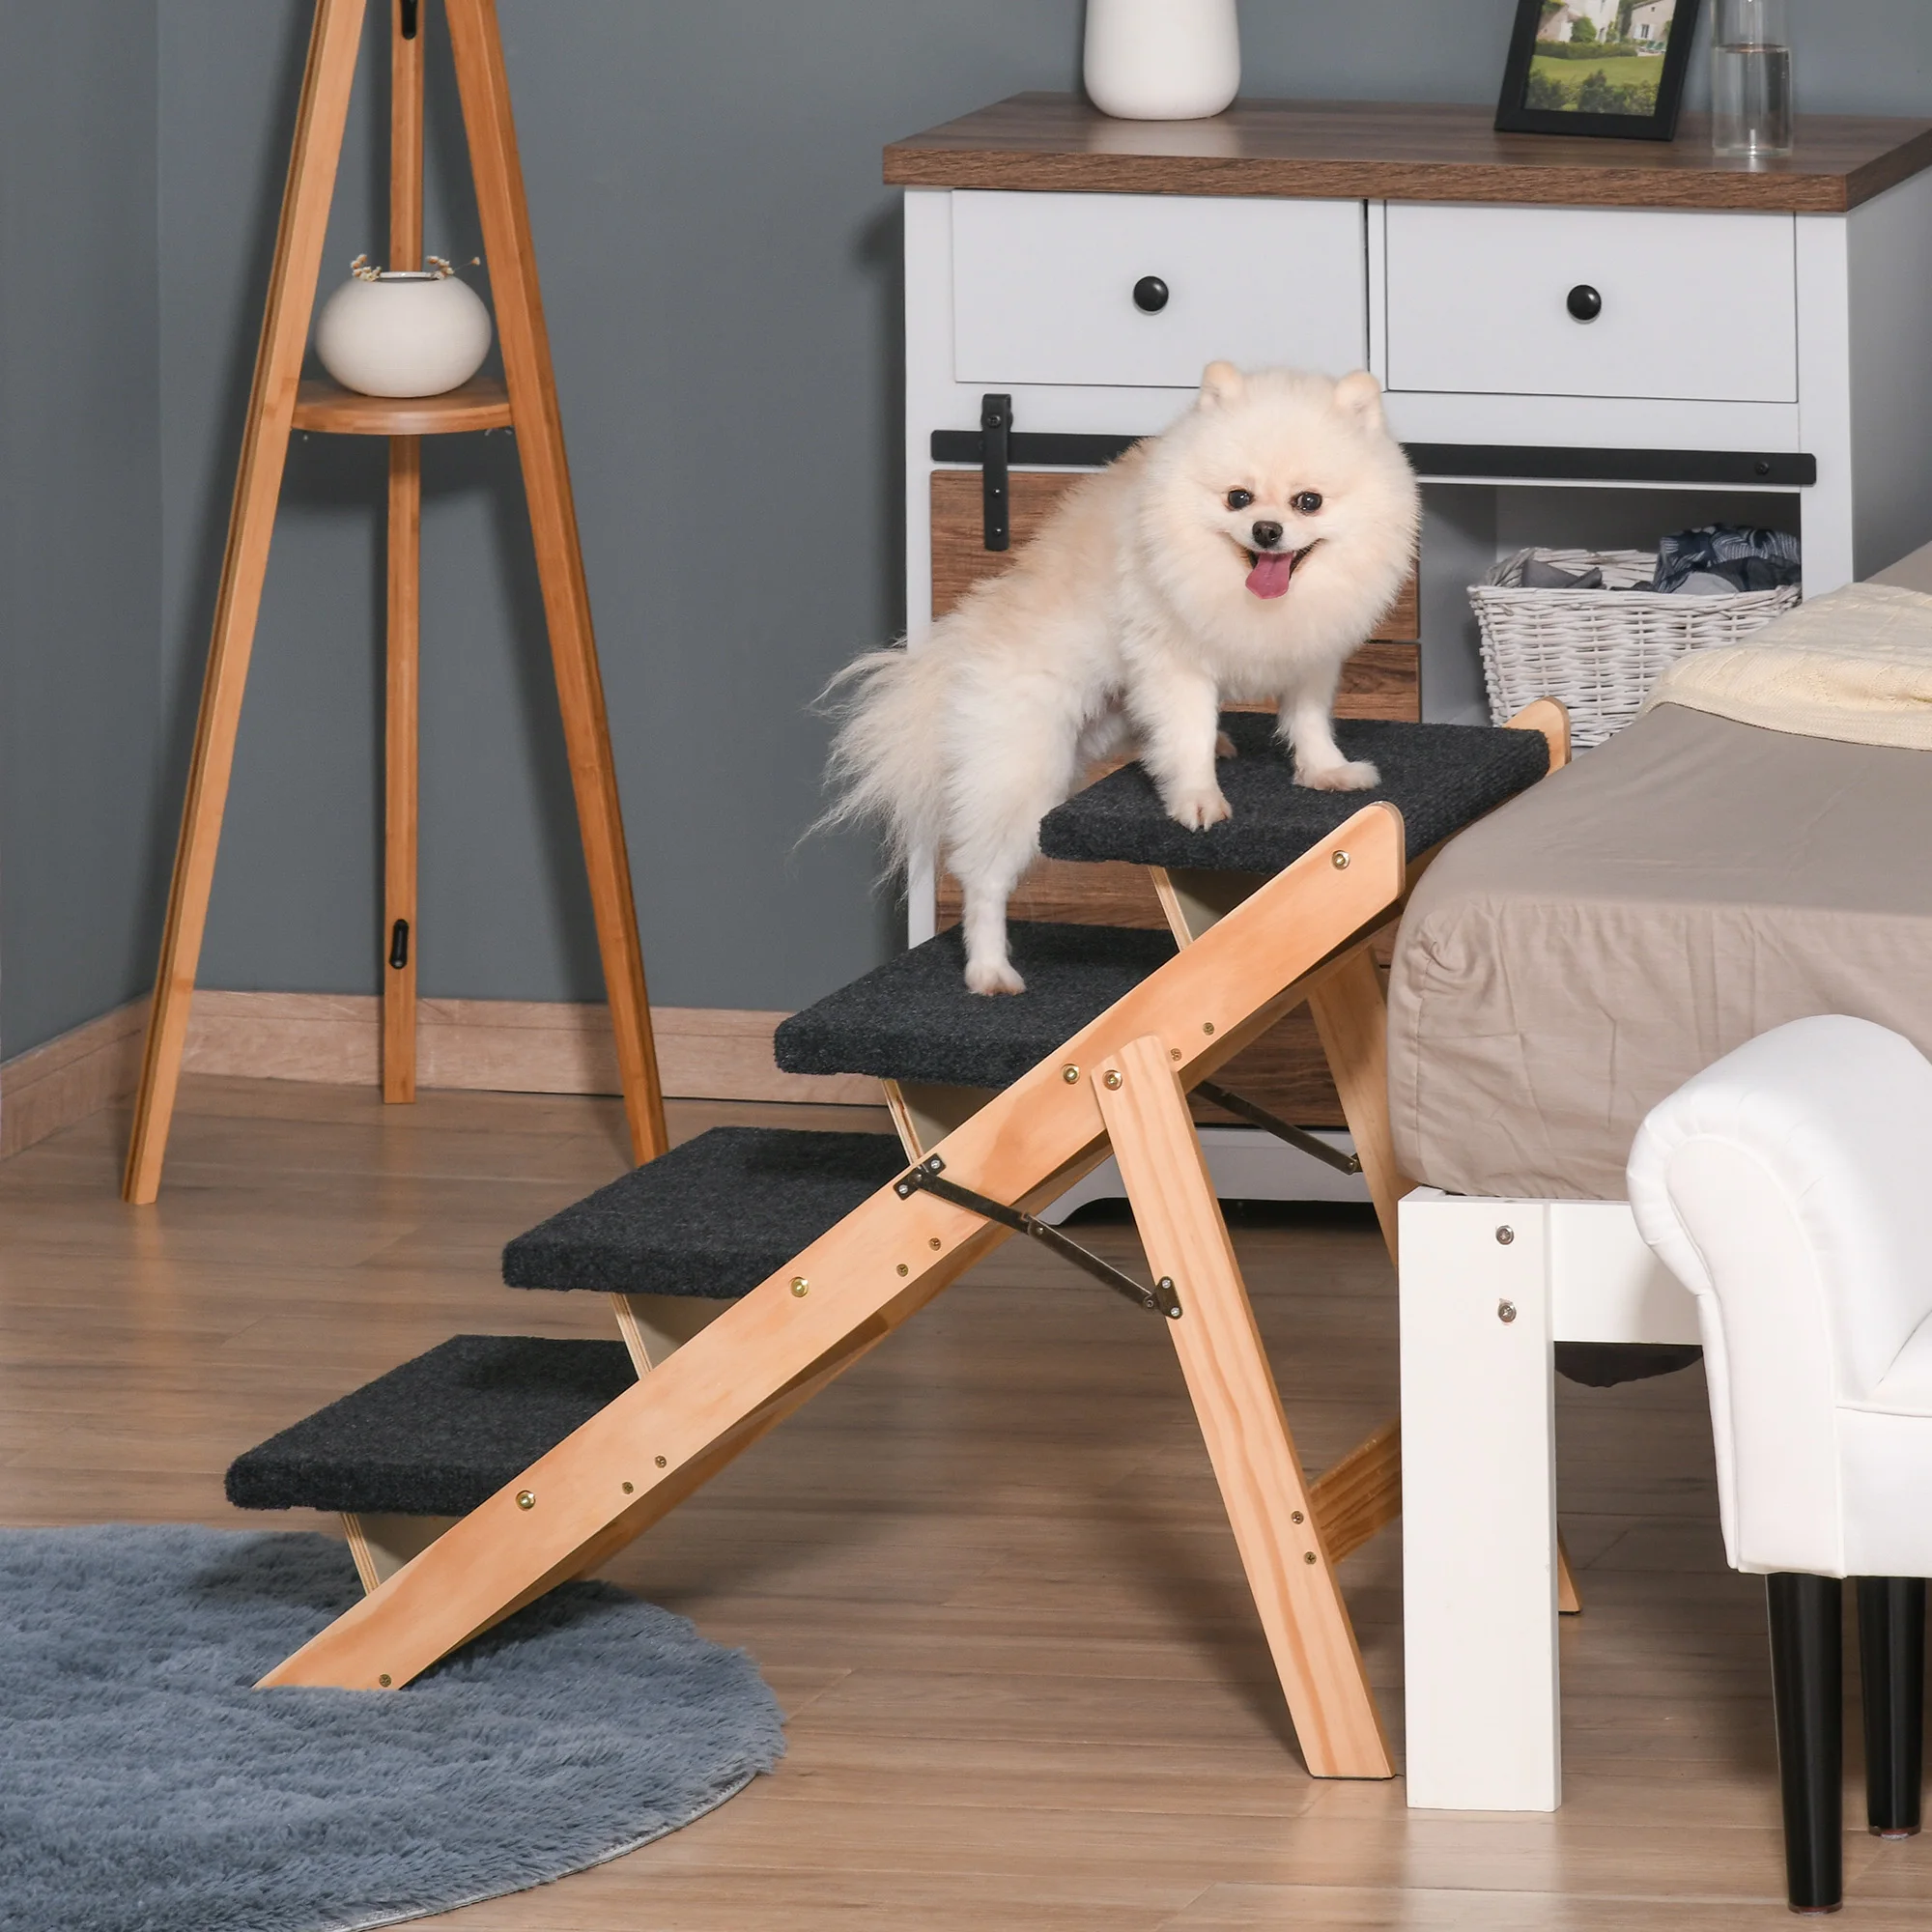 PawHut Wooden Pet Stairs 2 in 1 Convertible Carpeted Ramp Foldable 3 Level Ladder for High Bed Couch Car 